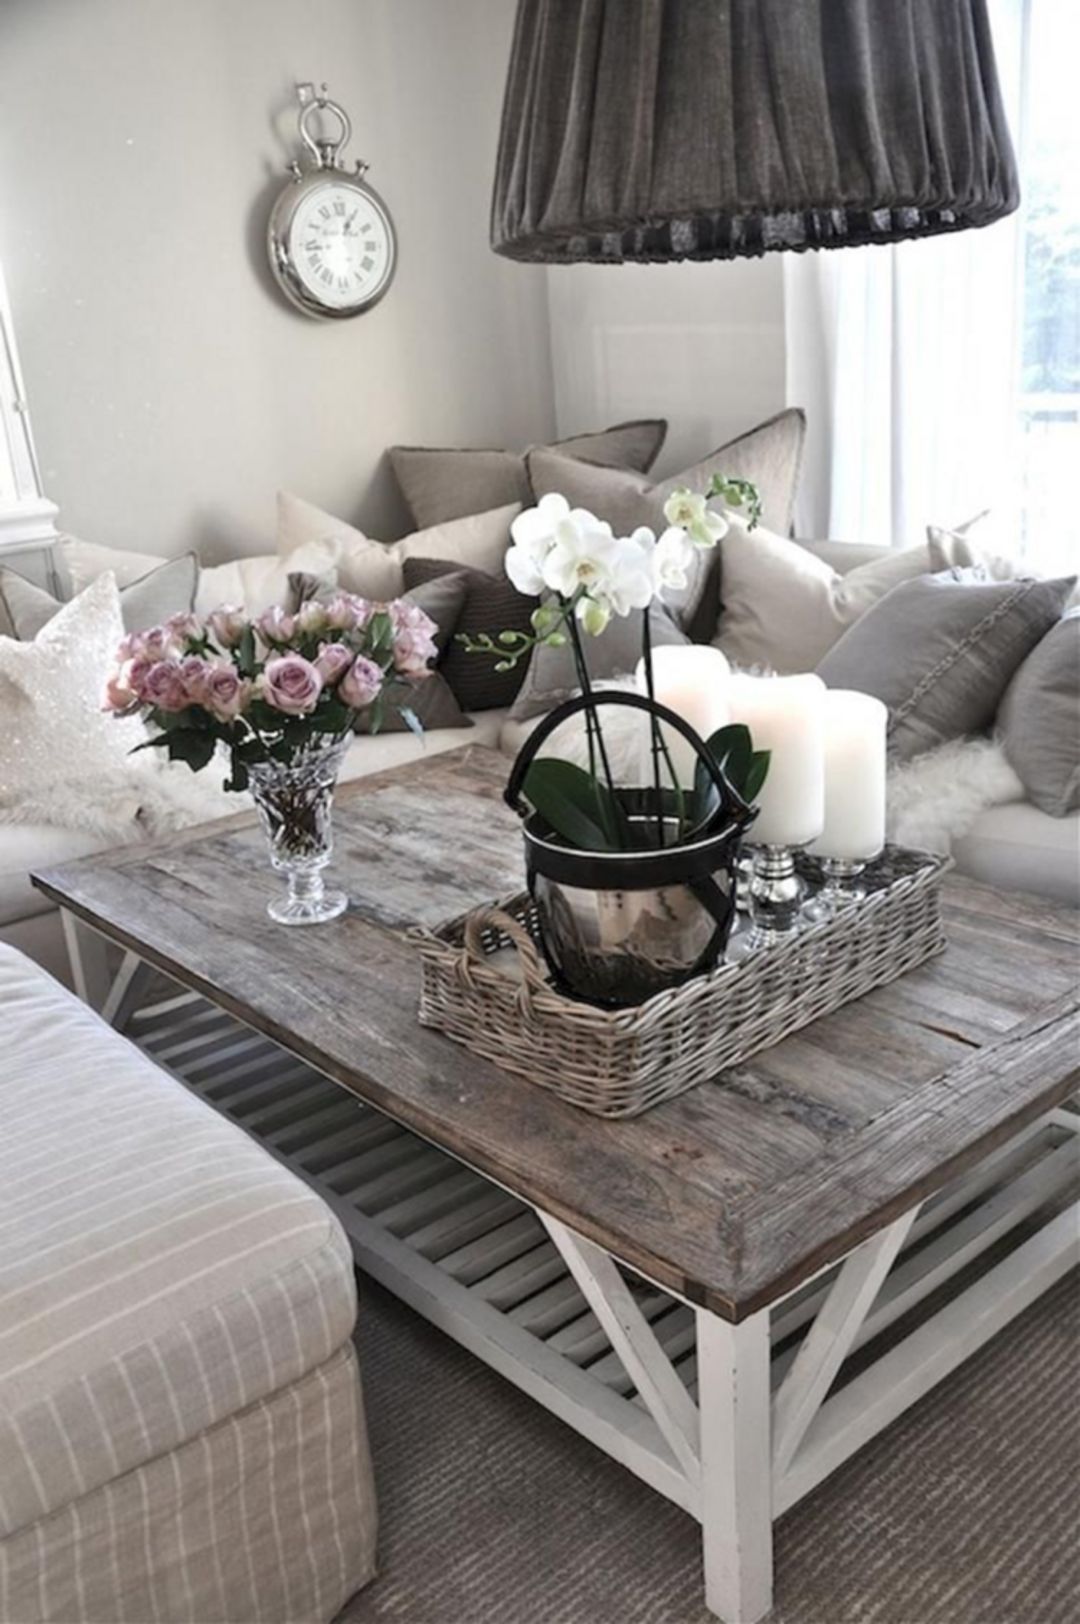 Adorable 25+ Great Farmhouse Coffee Table Design And Decor Ideas Https With Regard To Living Room Farmhouse Coffee Tables (Gallery 3 of 20)